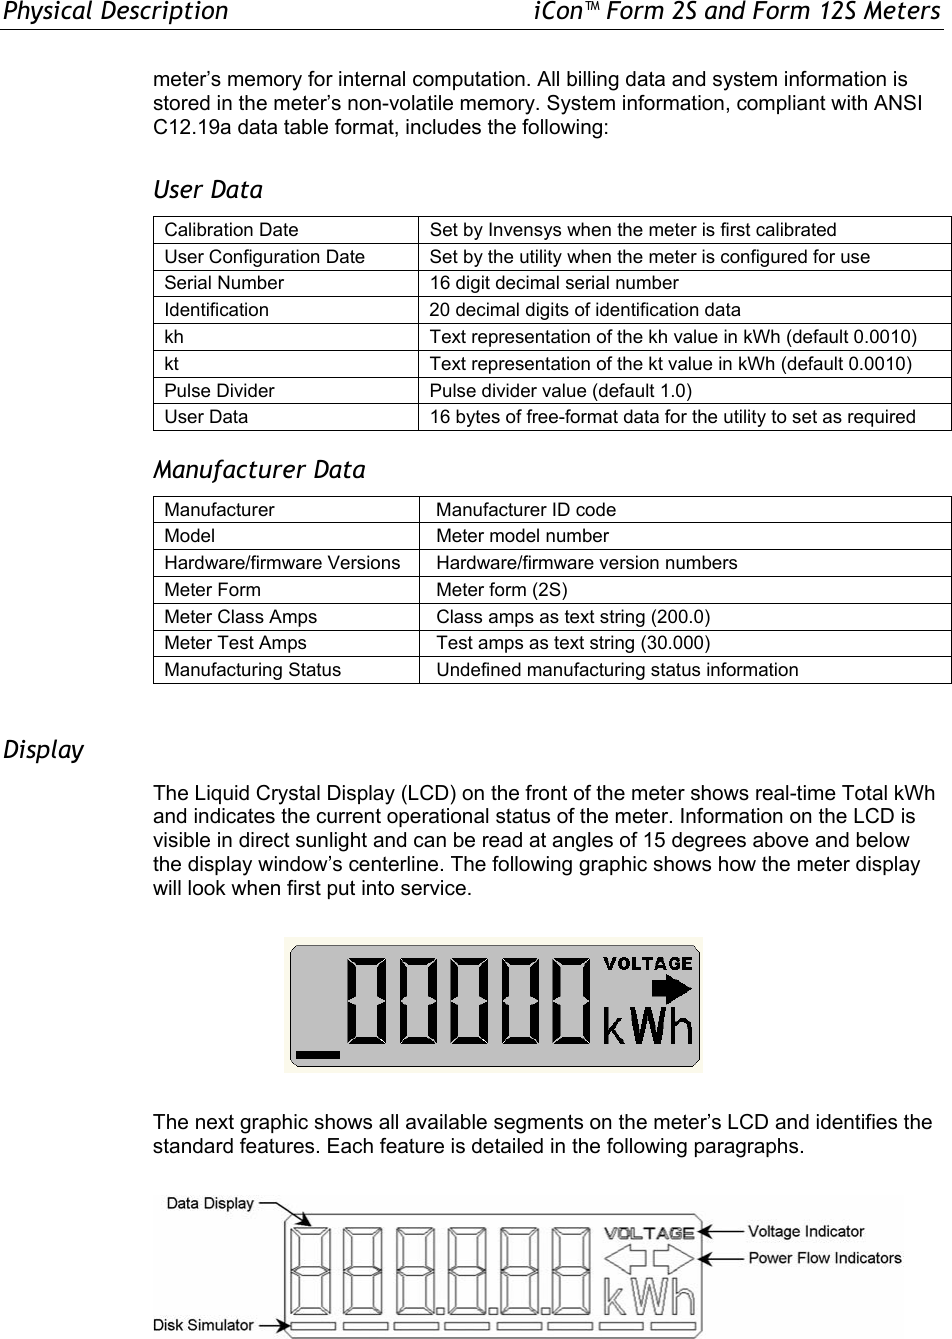 Physical Description  iCon™ Form 2S and Form 12S Meters meter’s memory for internal computation. All billing data and system information is stored in the meter’s non-volatile memory. System information, compliant with ANSI C12.19a data table format, includes the following: User Data Calibration Date  Set by Invensys when the meter is first calibrated User Configuration Date  Set by the utility when the meter is configured for use Serial Number  16 digit decimal serial number Identification  20 decimal digits of identification data kh  Text representation of the kh value in kWh (default 0.0010) kt Text representation of the kt value in kWh (default 0.0010) Pulse Divider  Pulse divider value (default 1.0) User Data  16 bytes of free-format data for the utility to set as required Manufacturer Data Manufacturer   Manufacturer ID code Model   Meter model number Hardware/firmware Versions   Hardware/firmware version numbers Meter Form   Meter form (2S) Meter Class Amps   Class amps as text string (200.0) Meter Test Amps   Test amps as text string (30.000) Manufacturing Status   Undefined manufacturing status information  Display The Liquid Crystal Display (LCD) on the front of the meter shows real-time Total kWh and indicates the current operational status of the meter. Information on the LCD is visible in direct sunlight and can be read at angles of 15 degrees above and below the display window’s centerline. The following graphic shows how the meter display will look when first put into service.  The next graphic shows all available segments on the meter’s LCD and identifies the standard features. Each feature is detailed in the following paragraphs.   